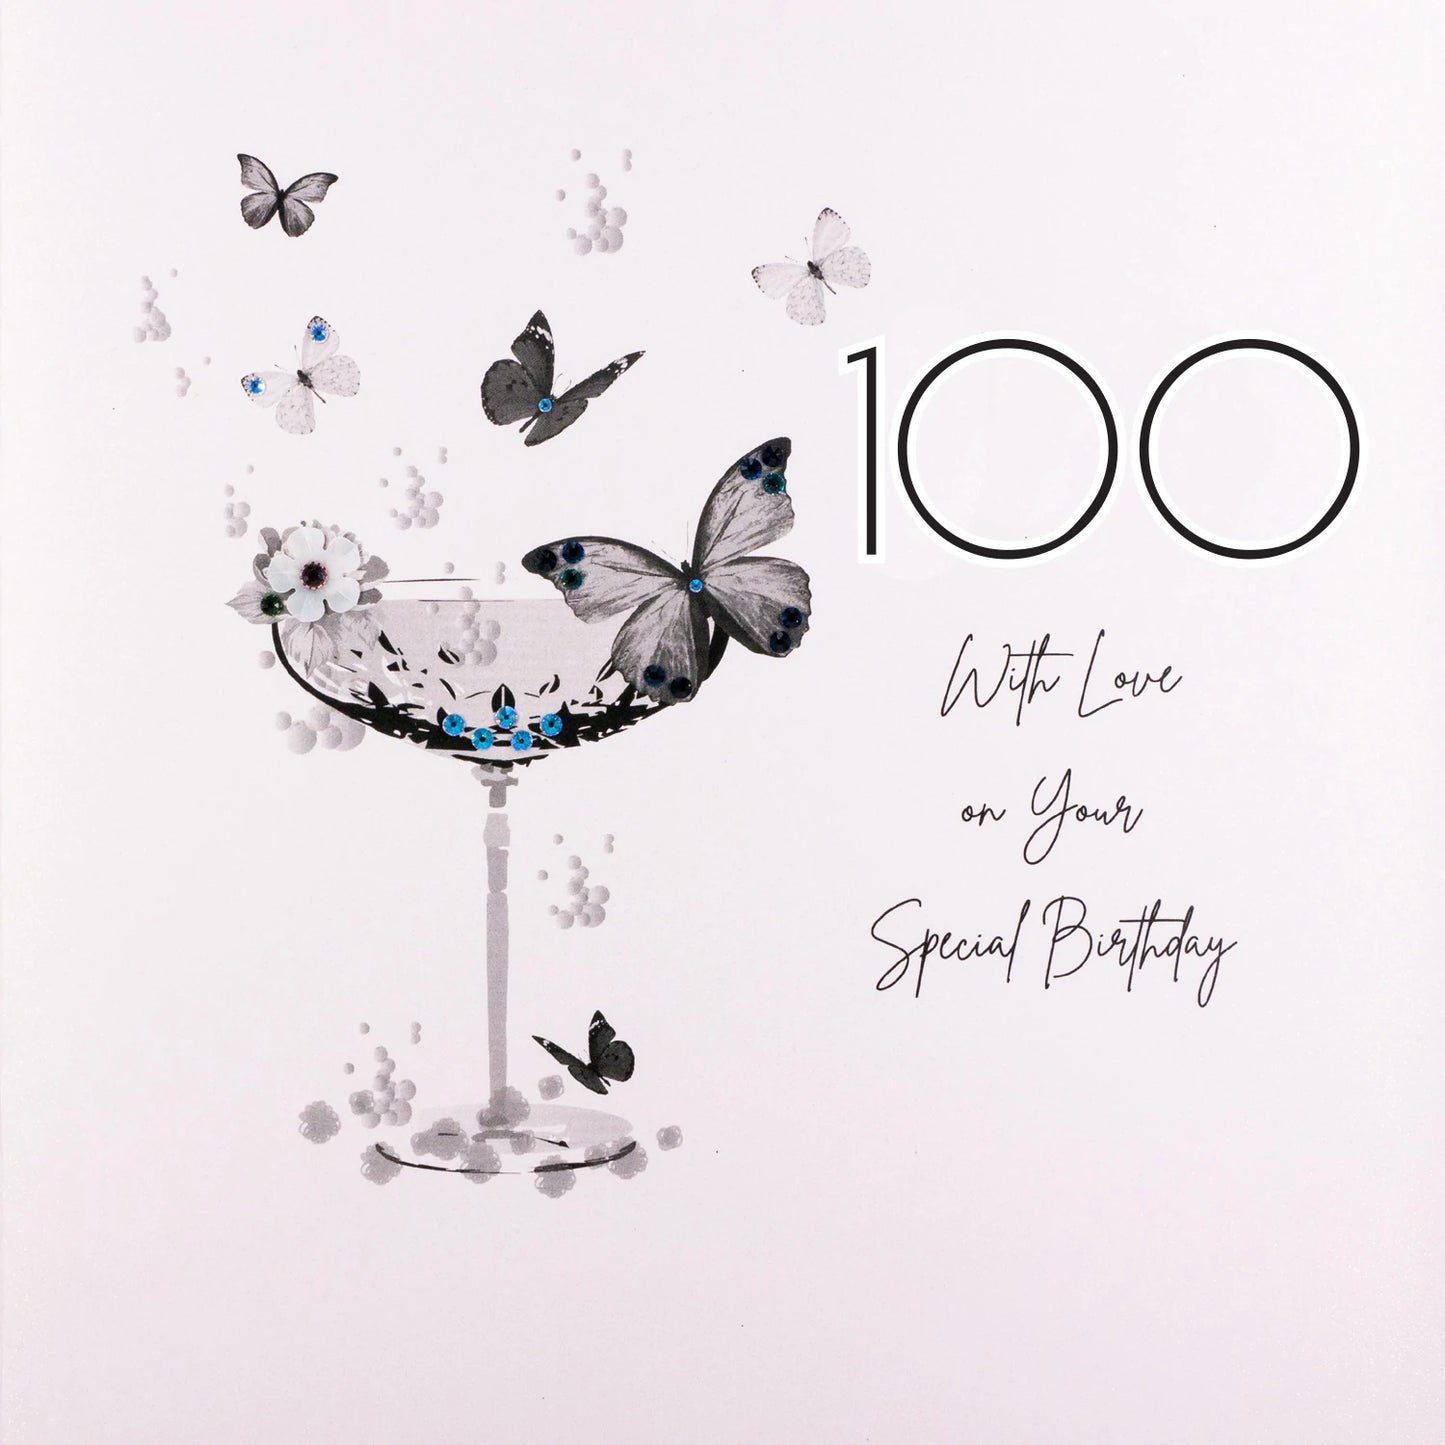 100 With love on your special birthday - Large Card